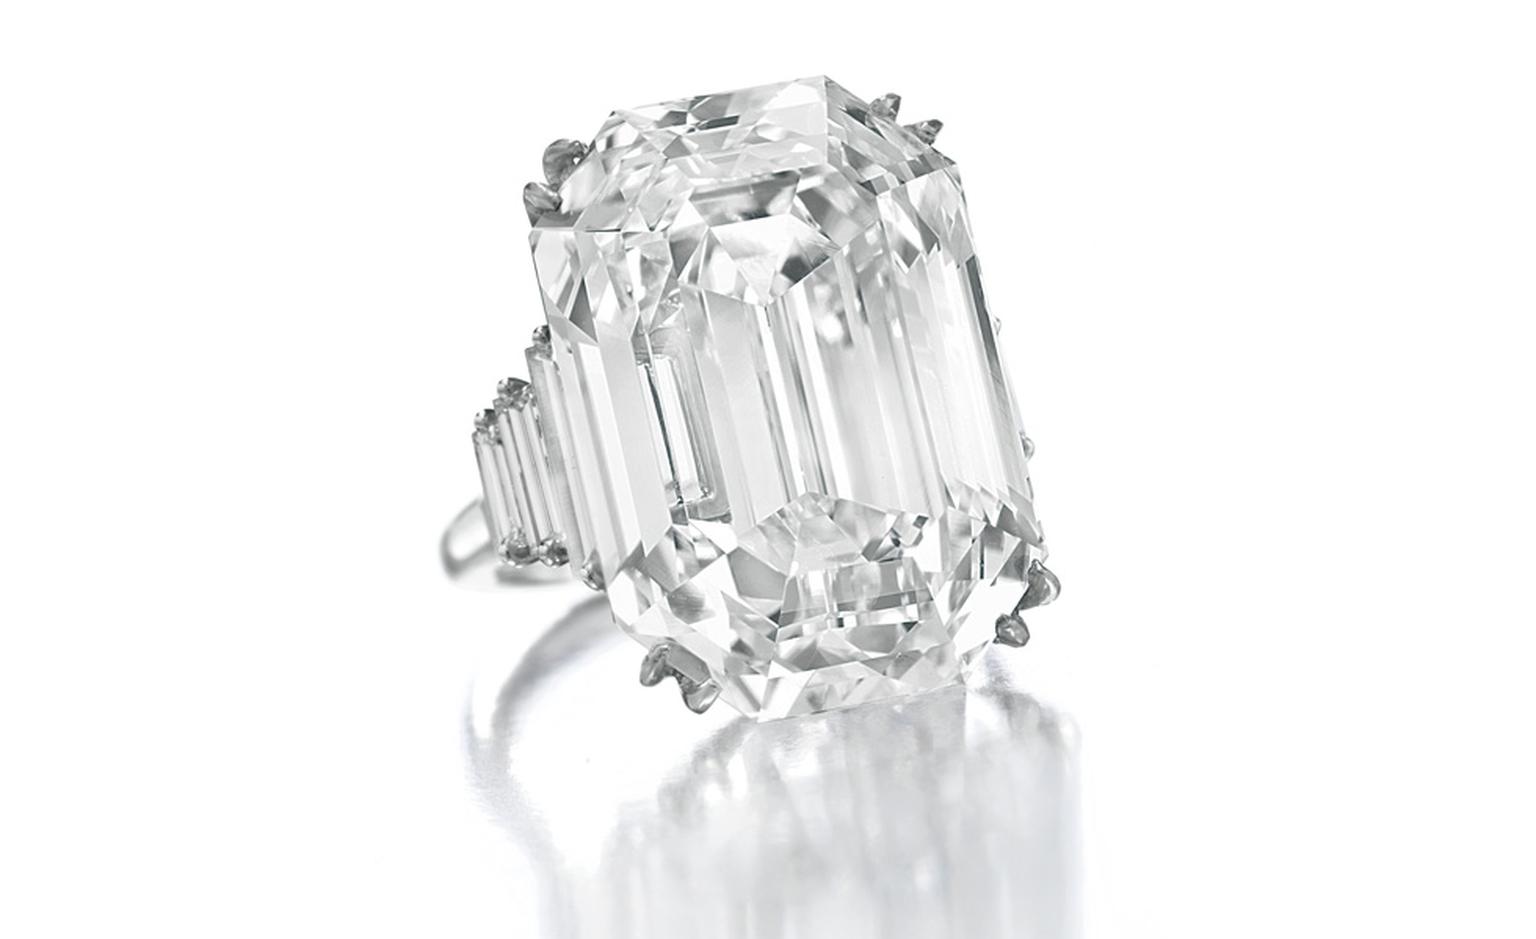 Lot 272 White diamond ring, 37.16 carats. Type IIa stone, D colour and internally flawless. Estimate $4,200,000 to $4,800,000. SOLD FOR $4.450,500. Christie's images Ltd. 2010